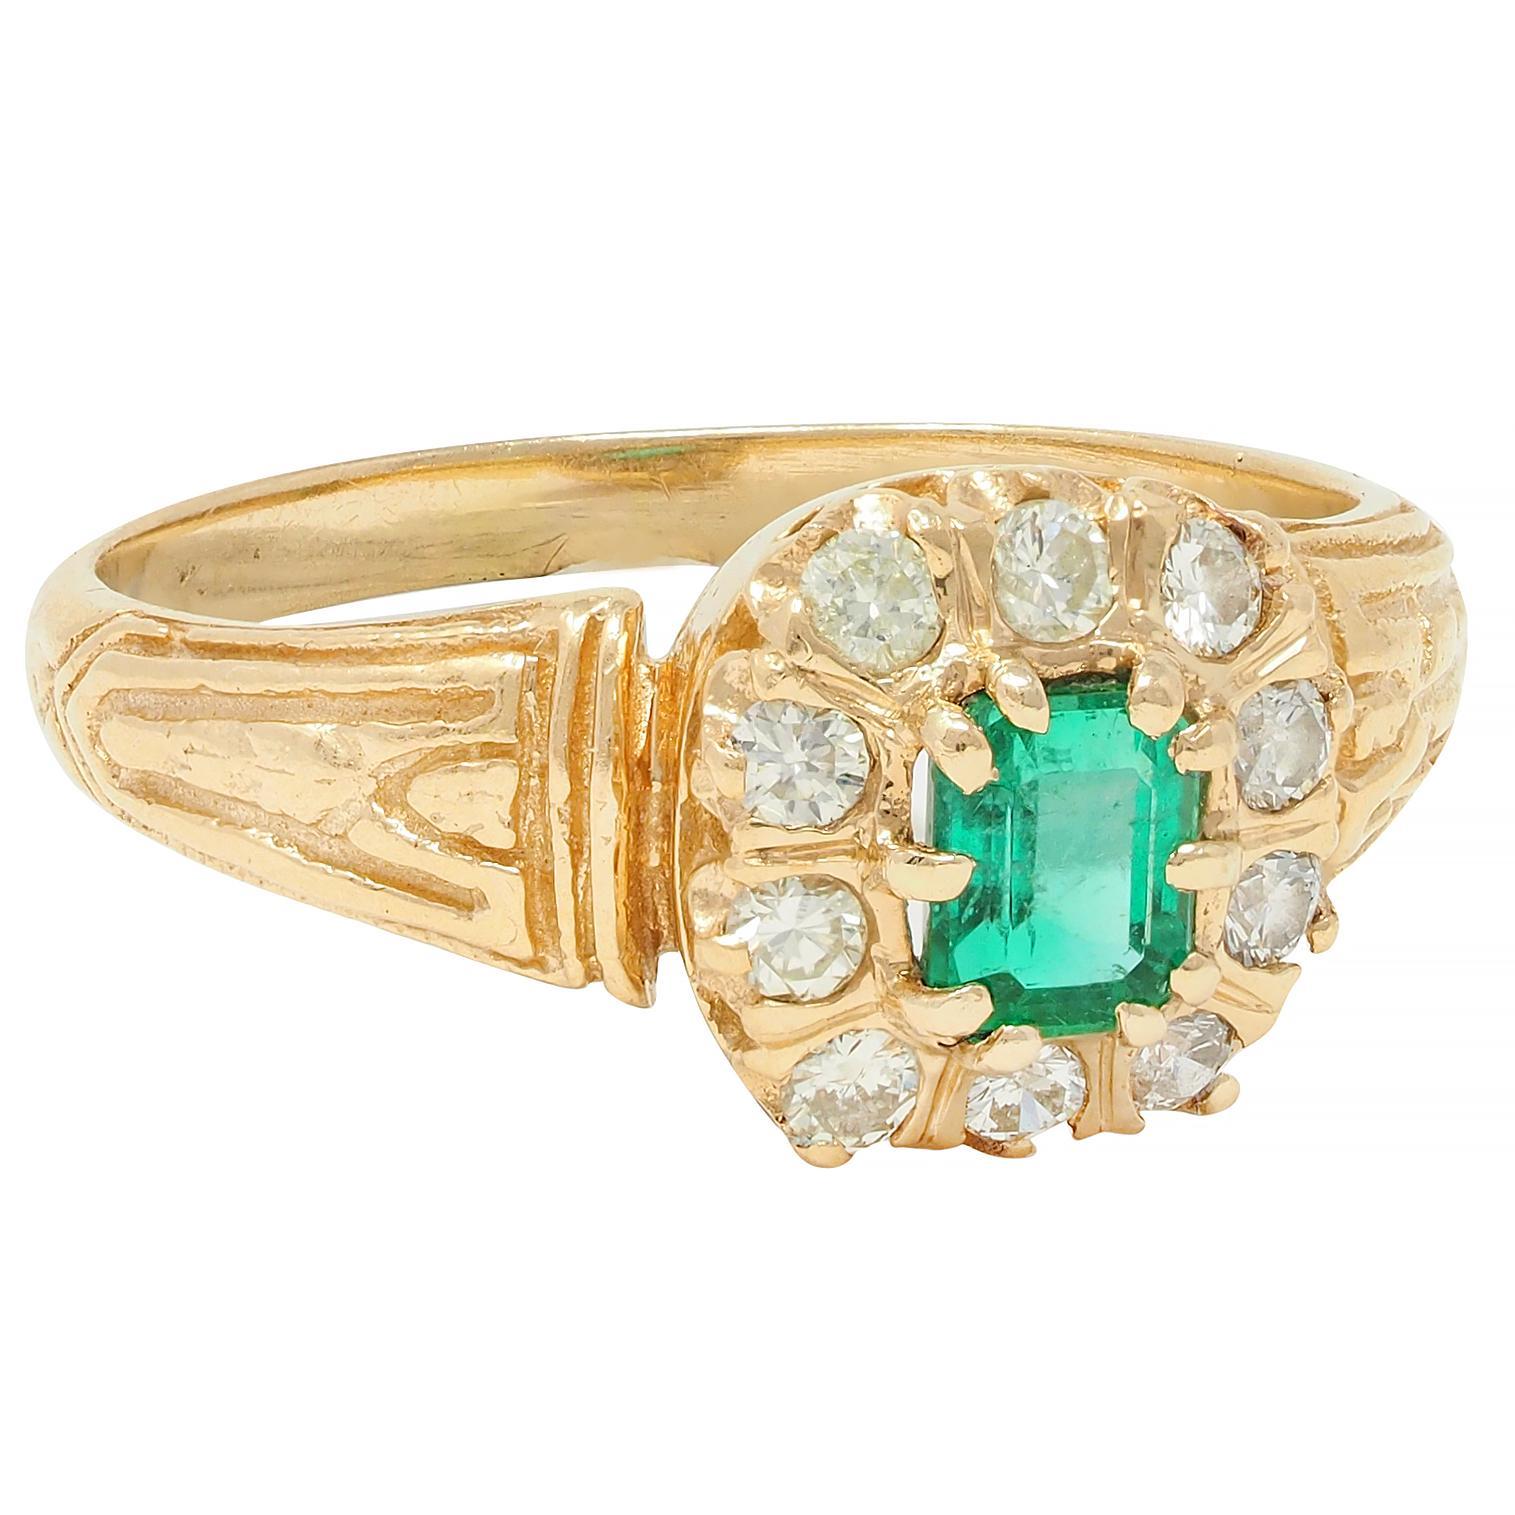 Centering an emerald cut emerald weighing approximately 0.35 carat total 
Transparent vibrant medium green in color - prong set
With a recessed halo surround of old European cut diamonds 
Weighing approximately 0.30 carat total - eye clean and